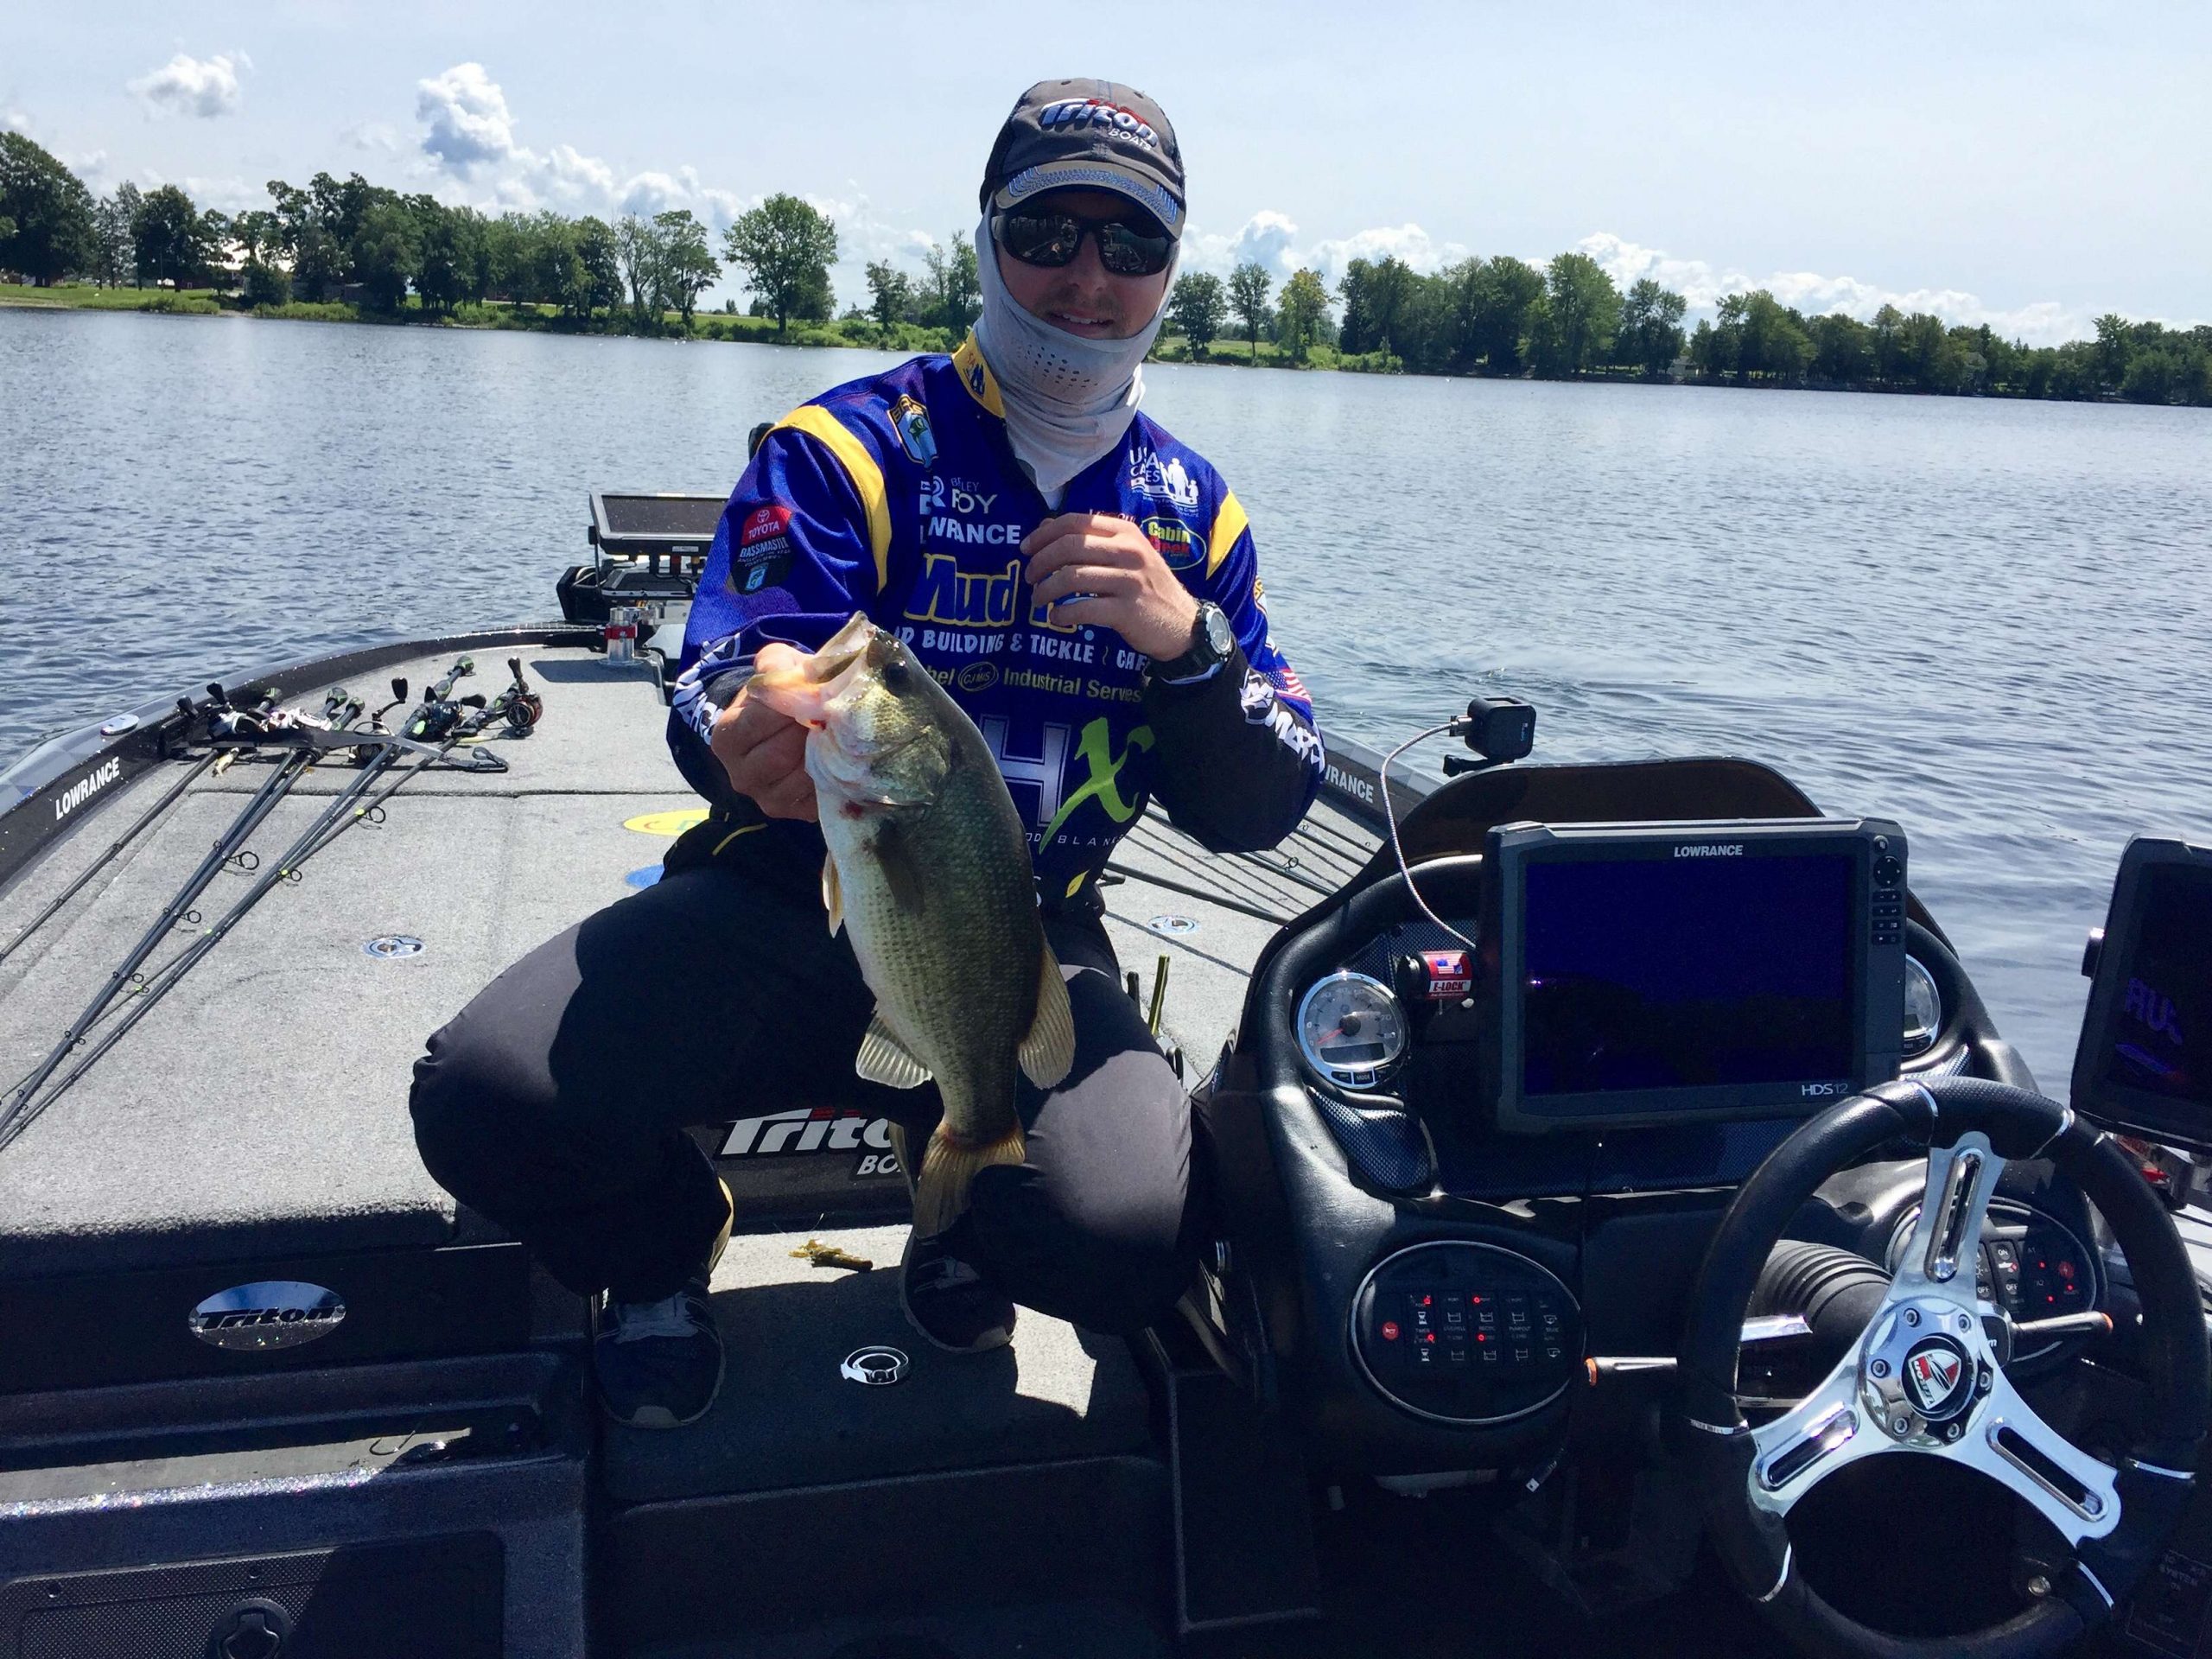 Bradley Roy has been consistent all day catching quality fish. He's slowly culling up to a good bag.